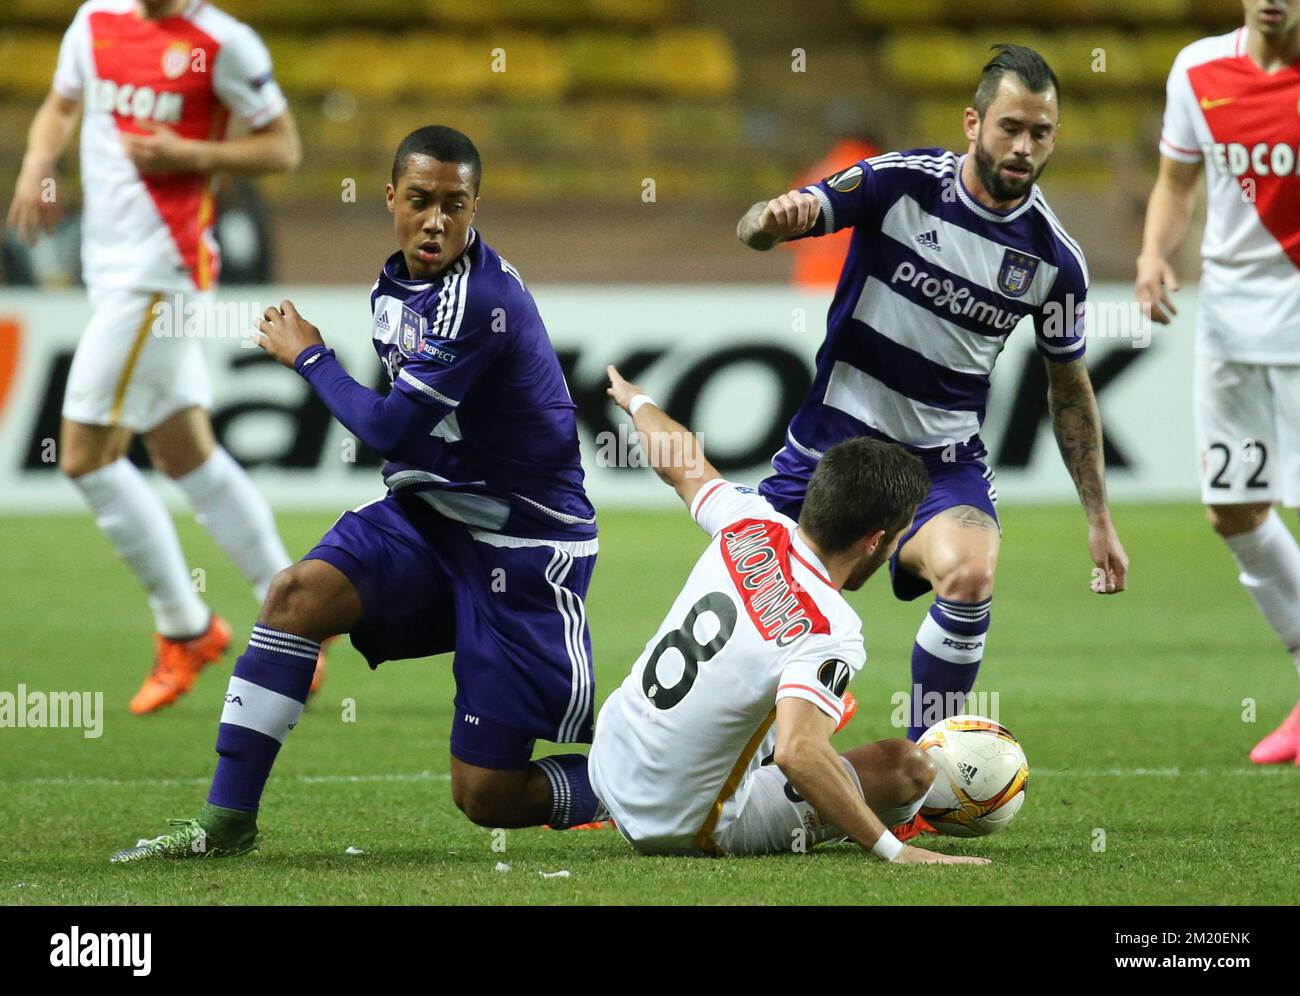 20151126 - MONACO, MONACO: Anderlecht's Youri Tielemans, Monaco's Joao  Moutinho and Anderlecht's Steven Defour fight for the ball during a game  between French club AS Monaco and Belgian first league soccer club